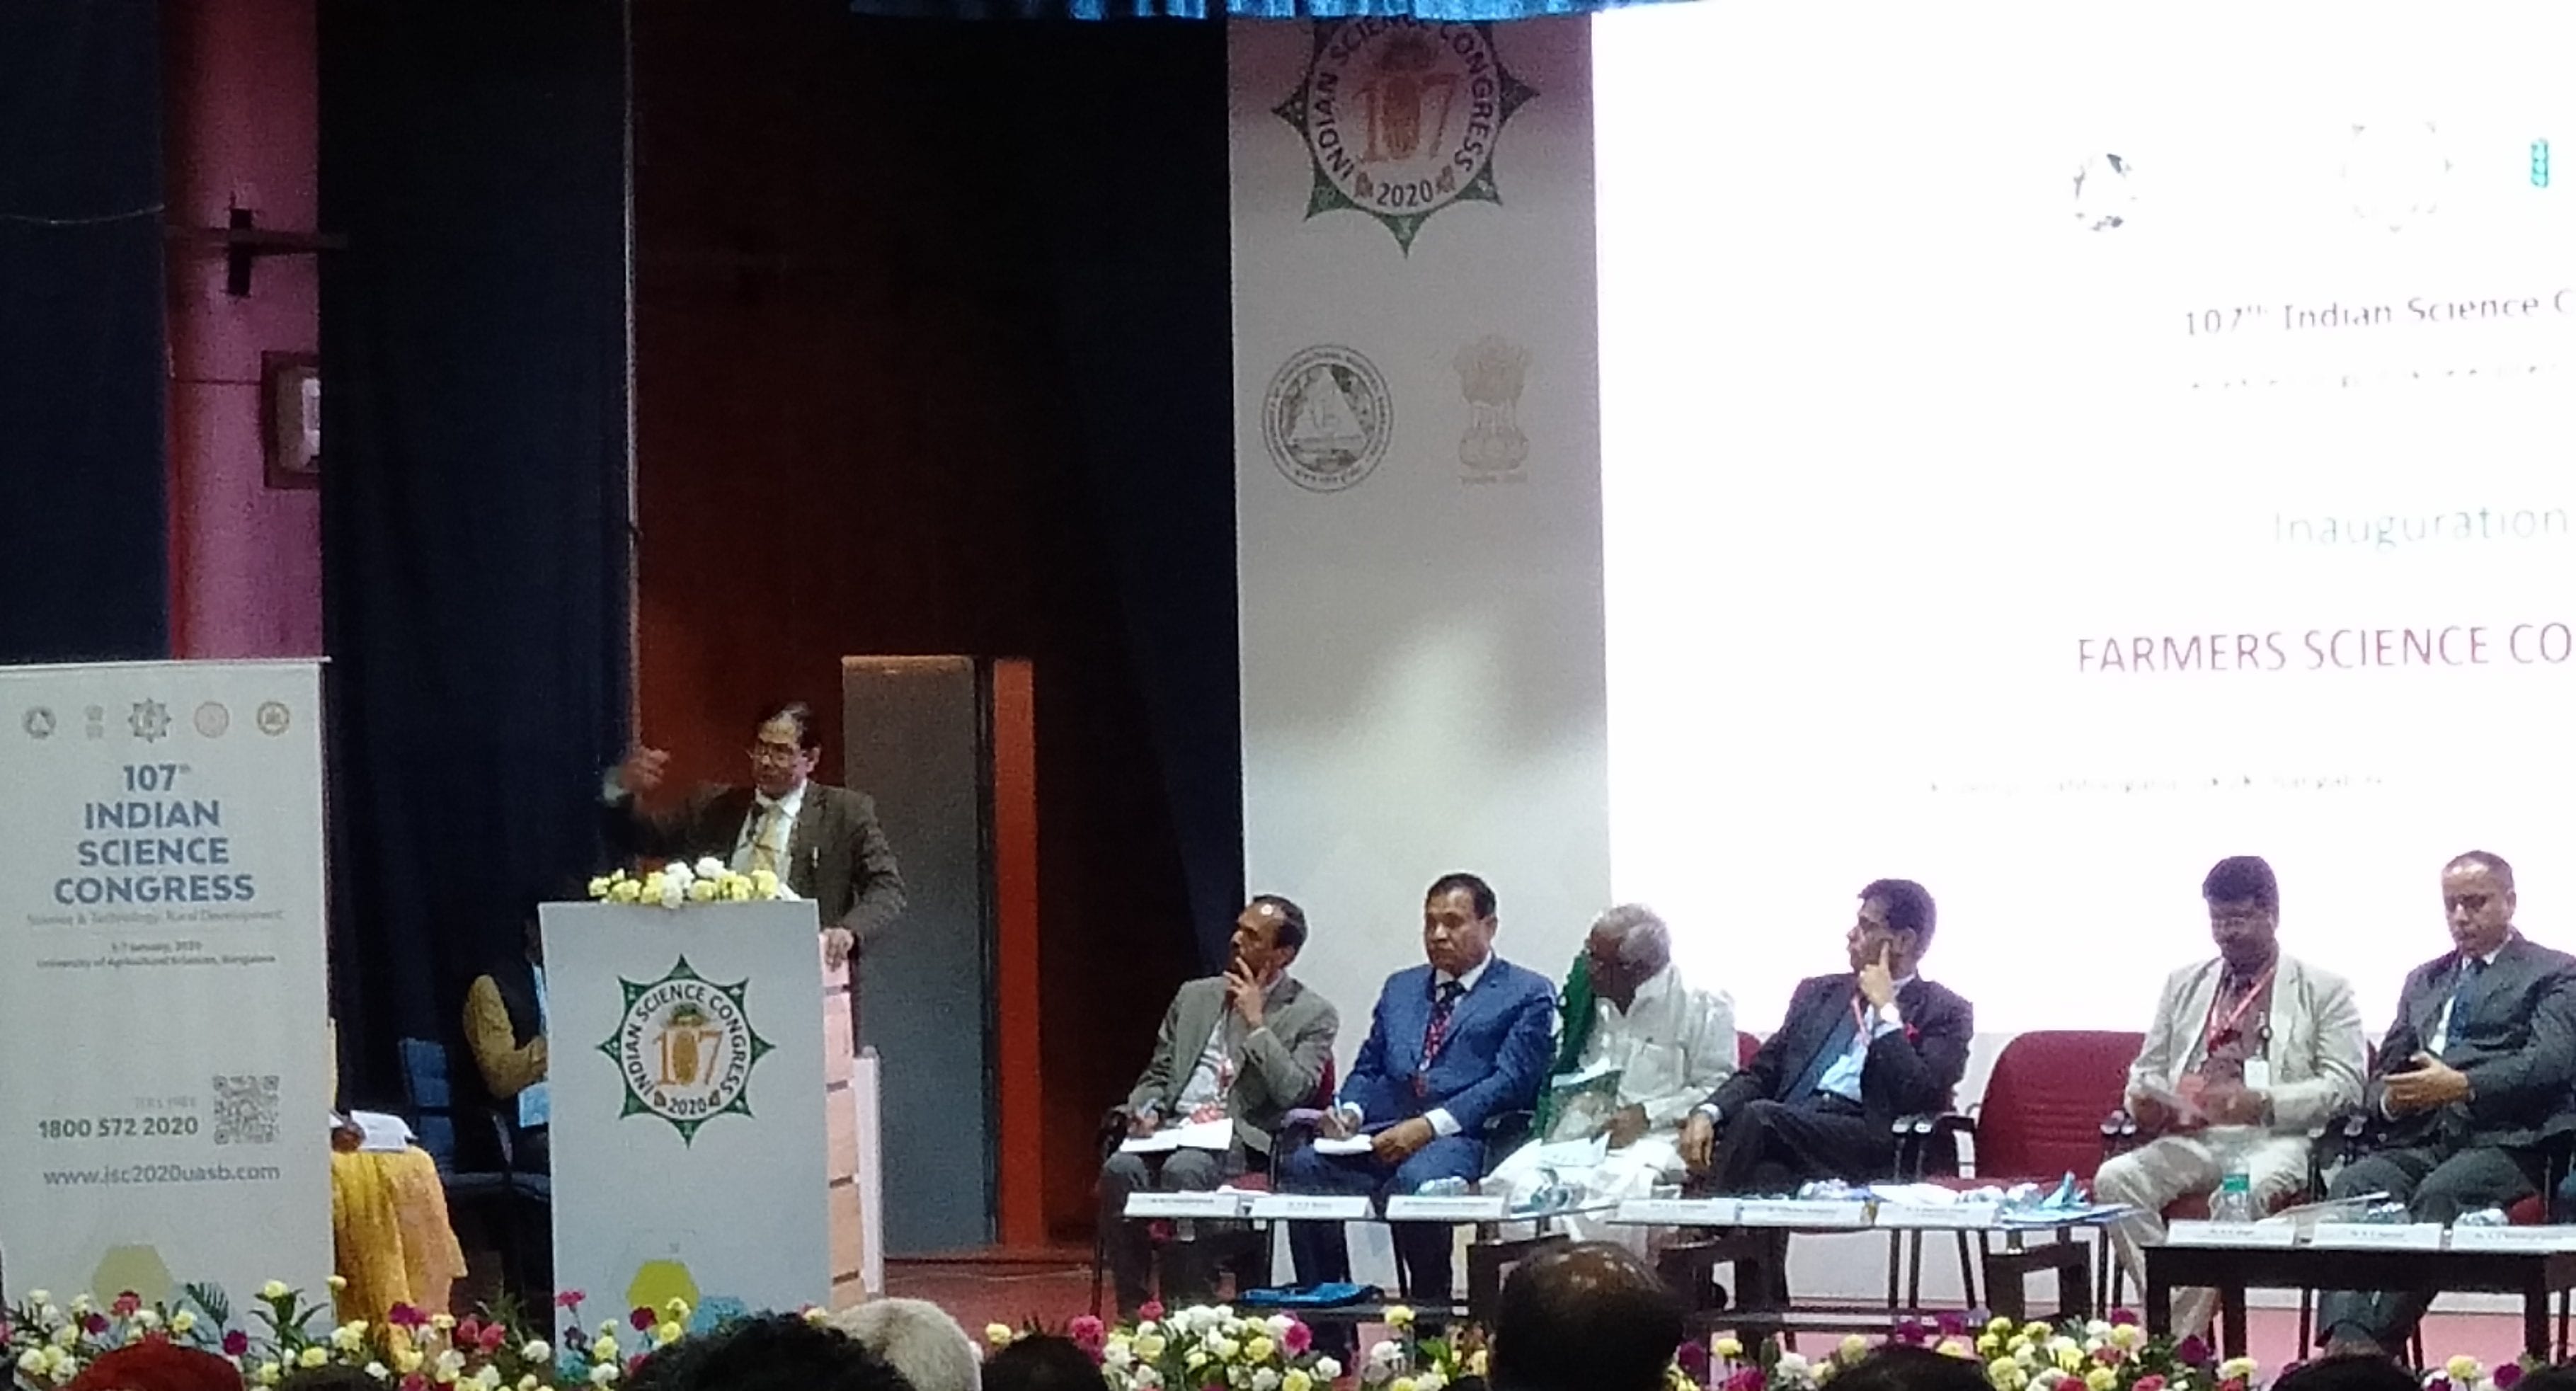 farm fund, farmers innovation, ICAR, Indian Council for Agriculture Research, Farmers’ Science Congress, Trilochan Mohapatra, agriculture, farming system, model